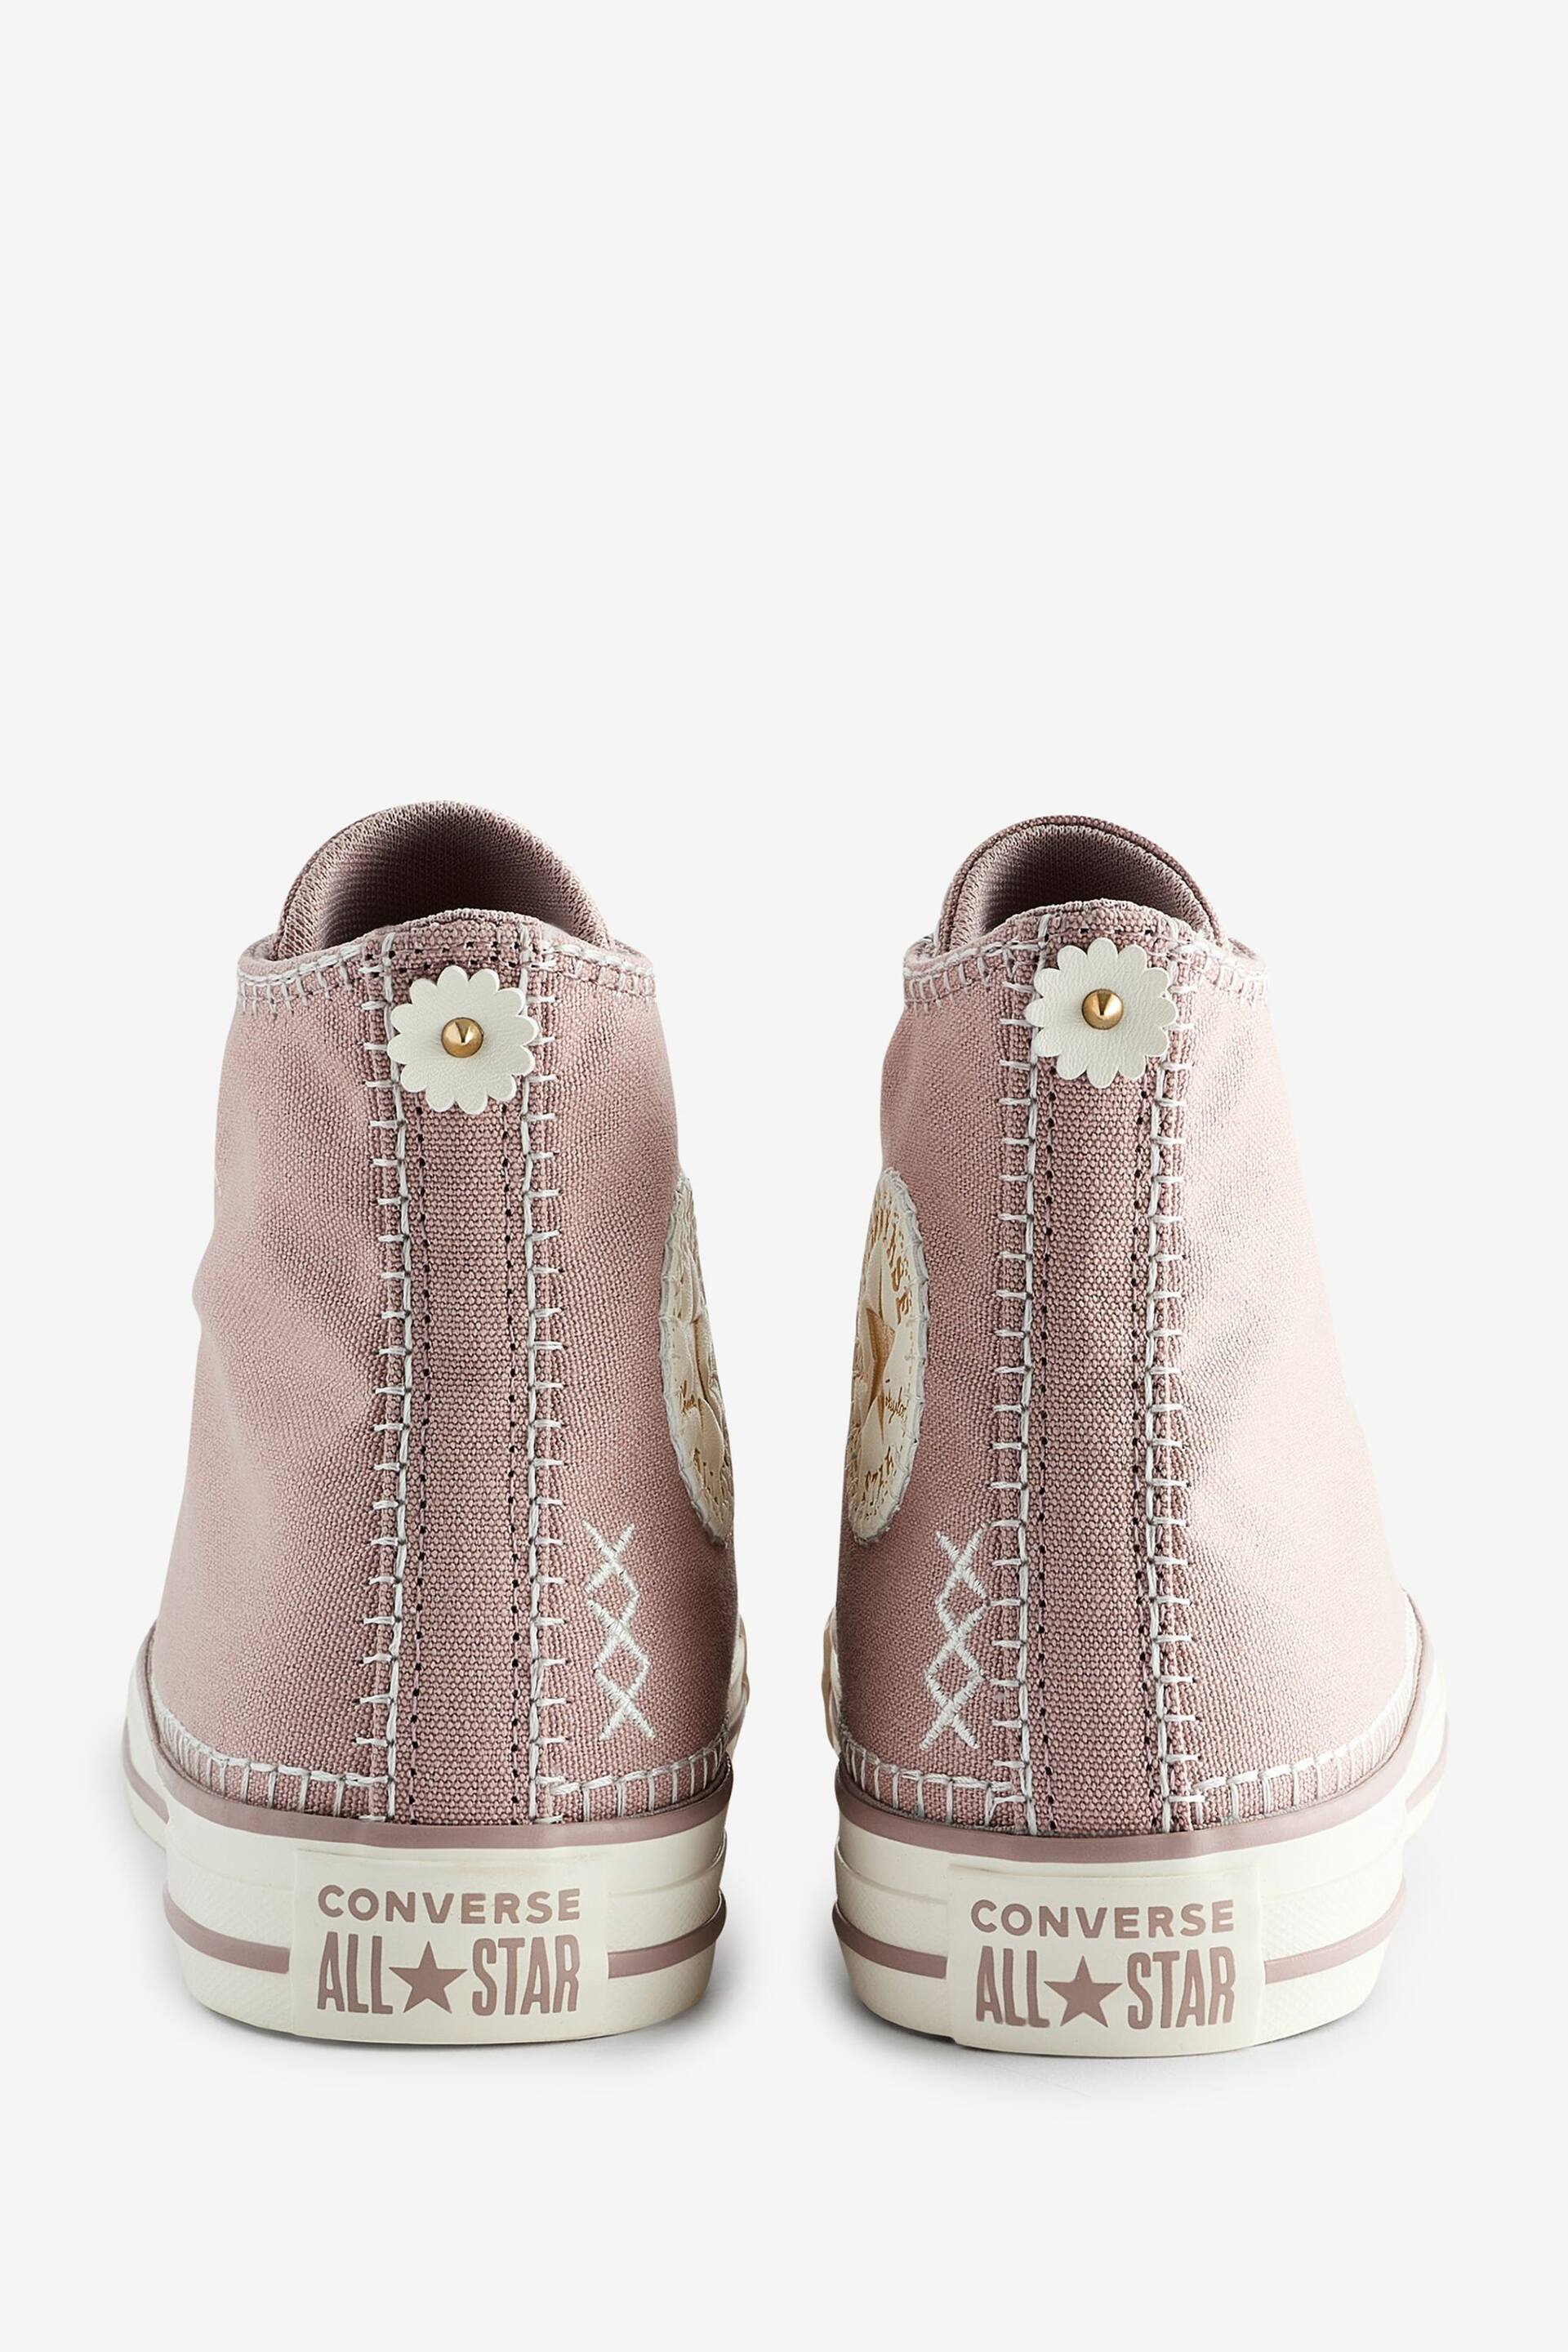 Converse Neutral Chuck Taylor All Star High Top Trainers - Image 4 of 9